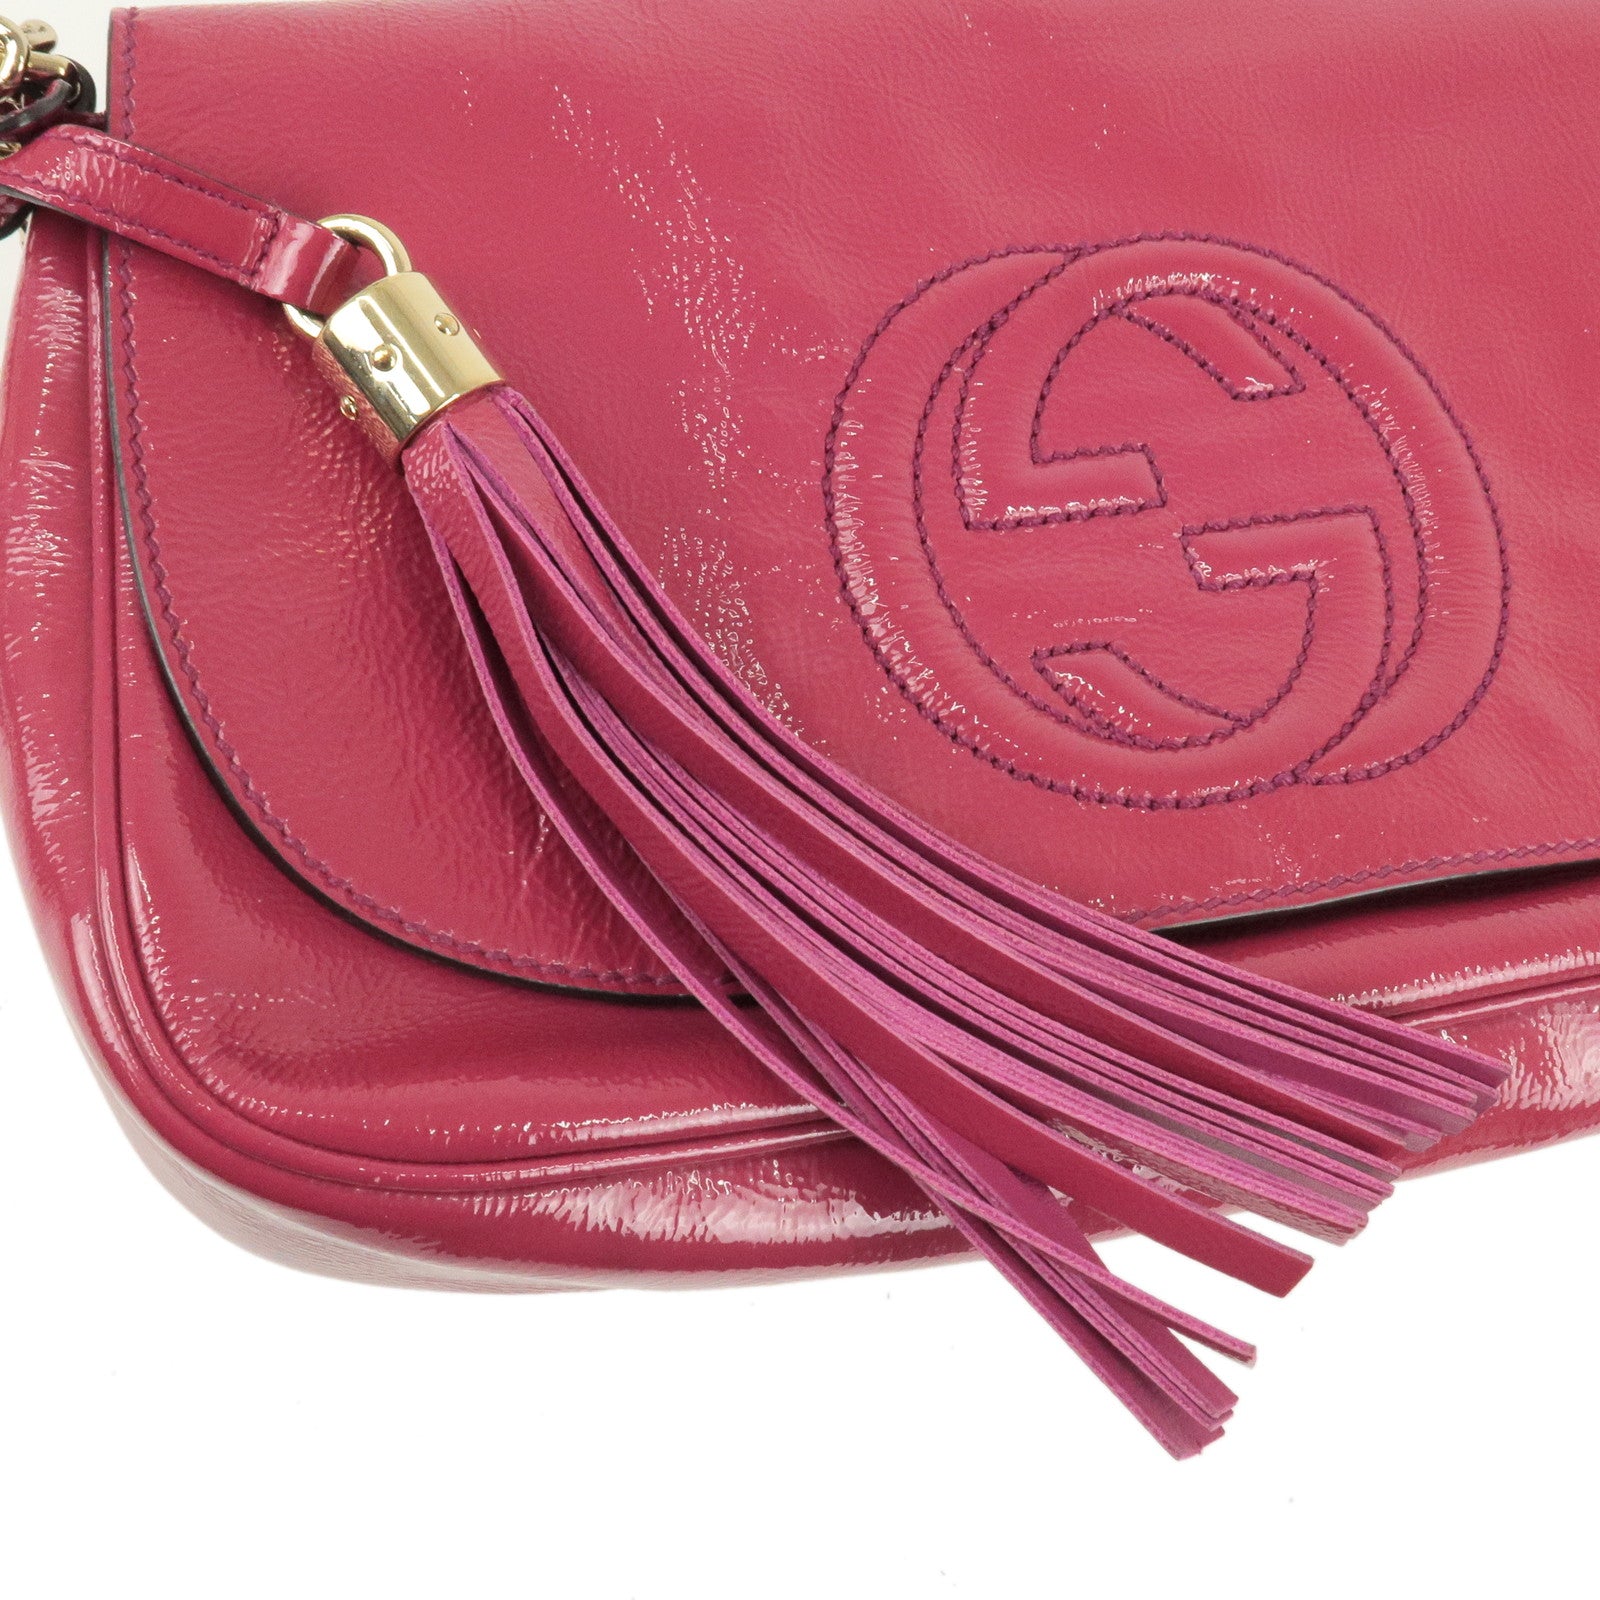 Gucci Soho Patent Leather Disco Bag in Pink